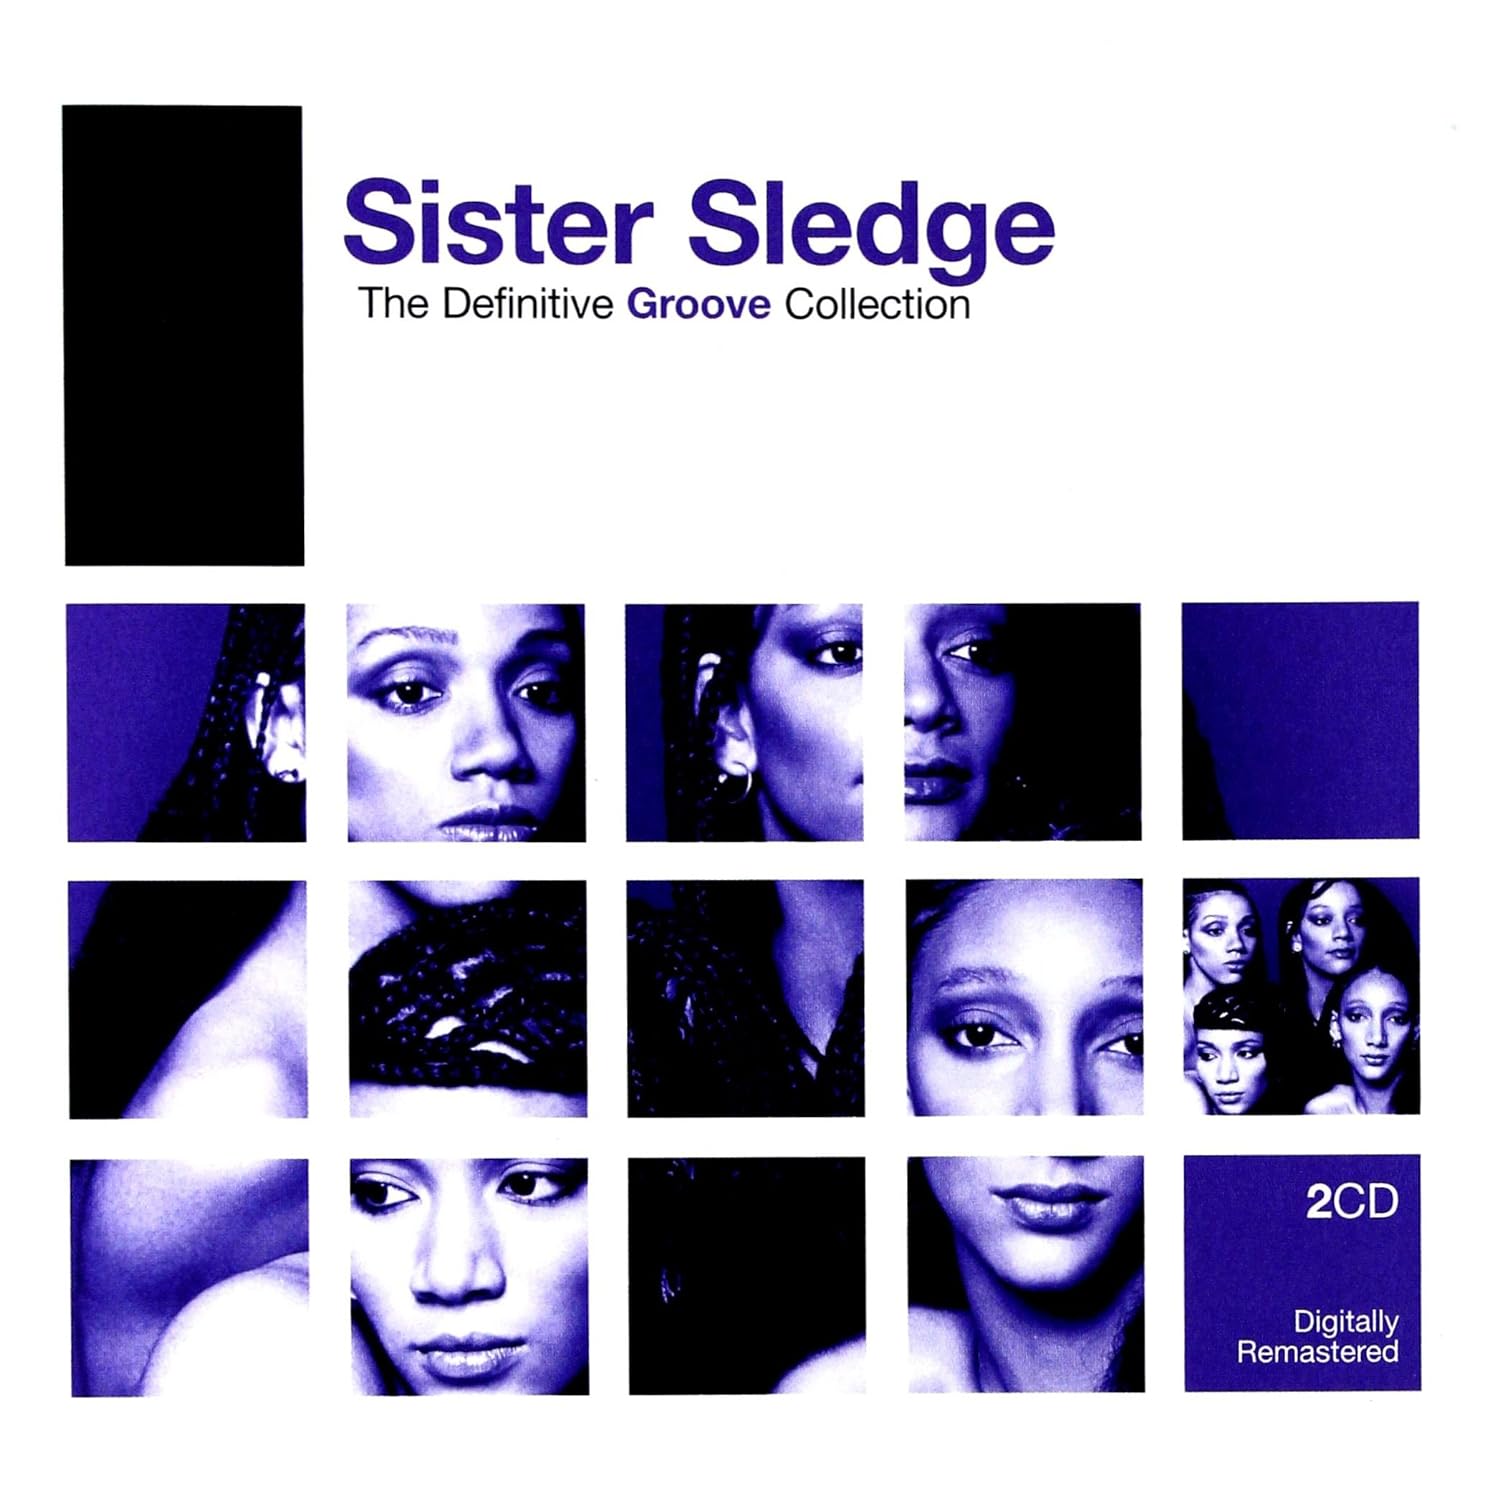 Sister Sledge - The Definitive Groove Collection (2CD)